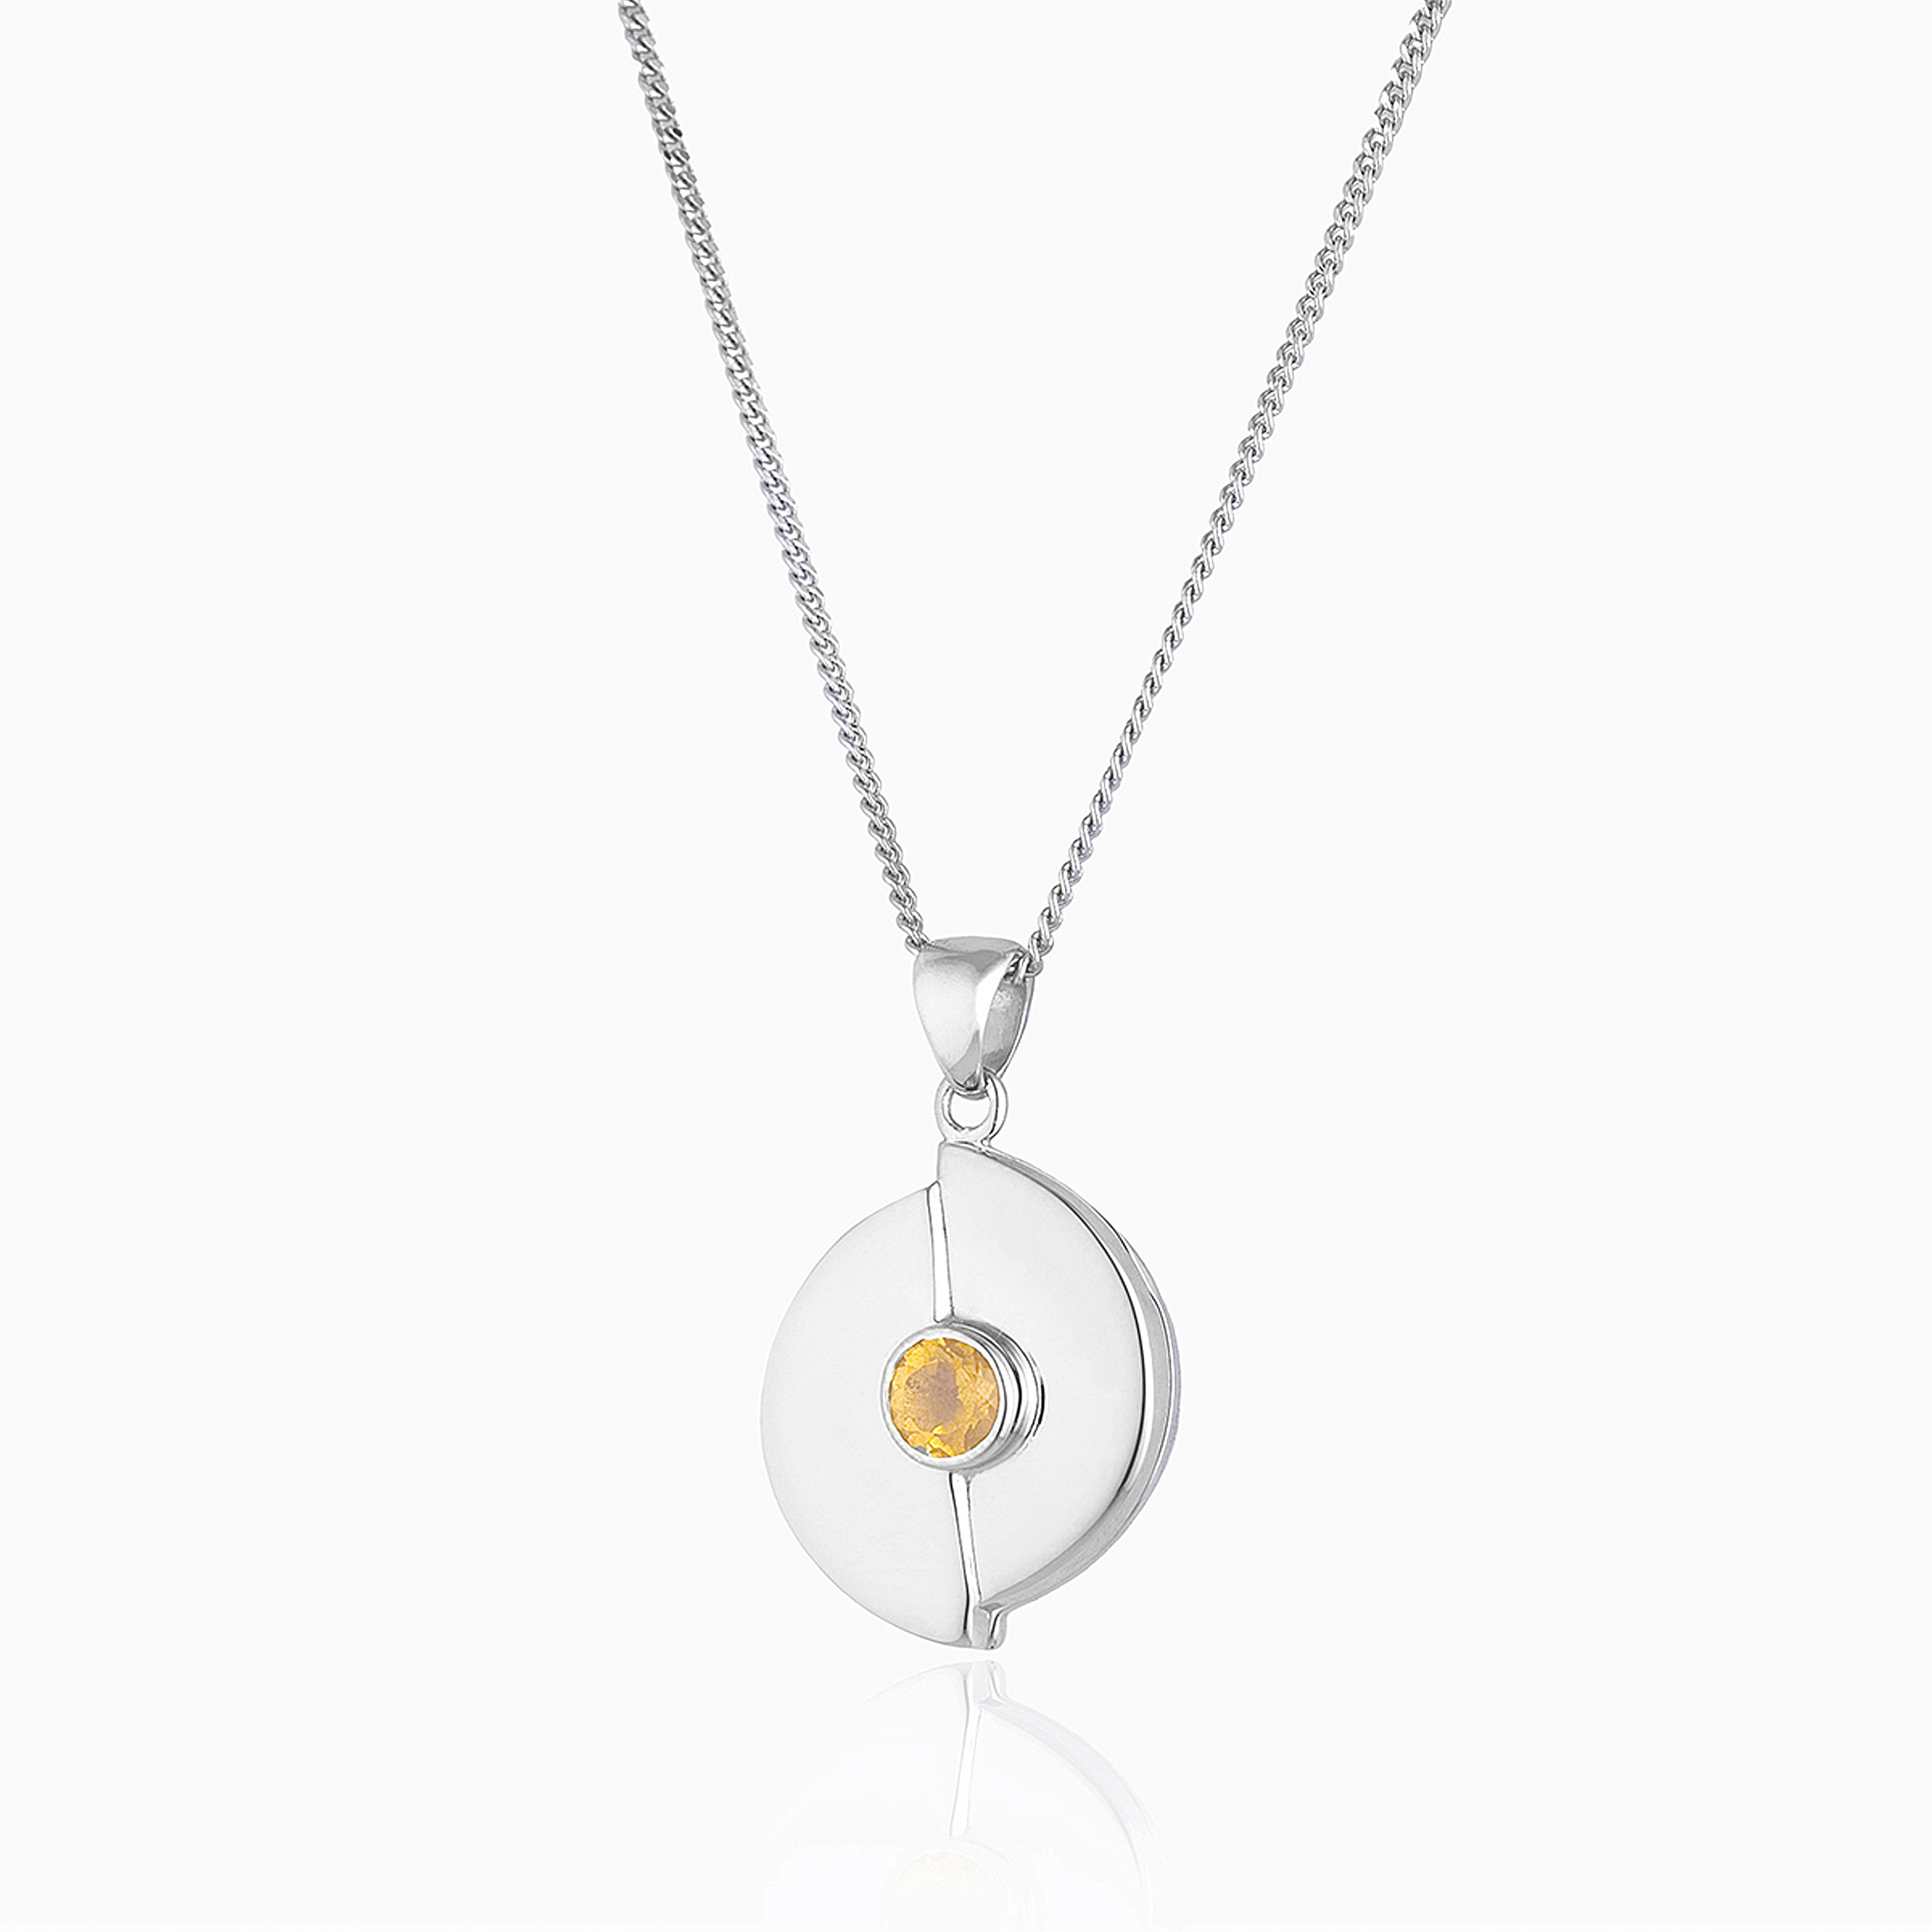 sterling silver round locket set with. yellow citrine, on a sterling silver curb chain